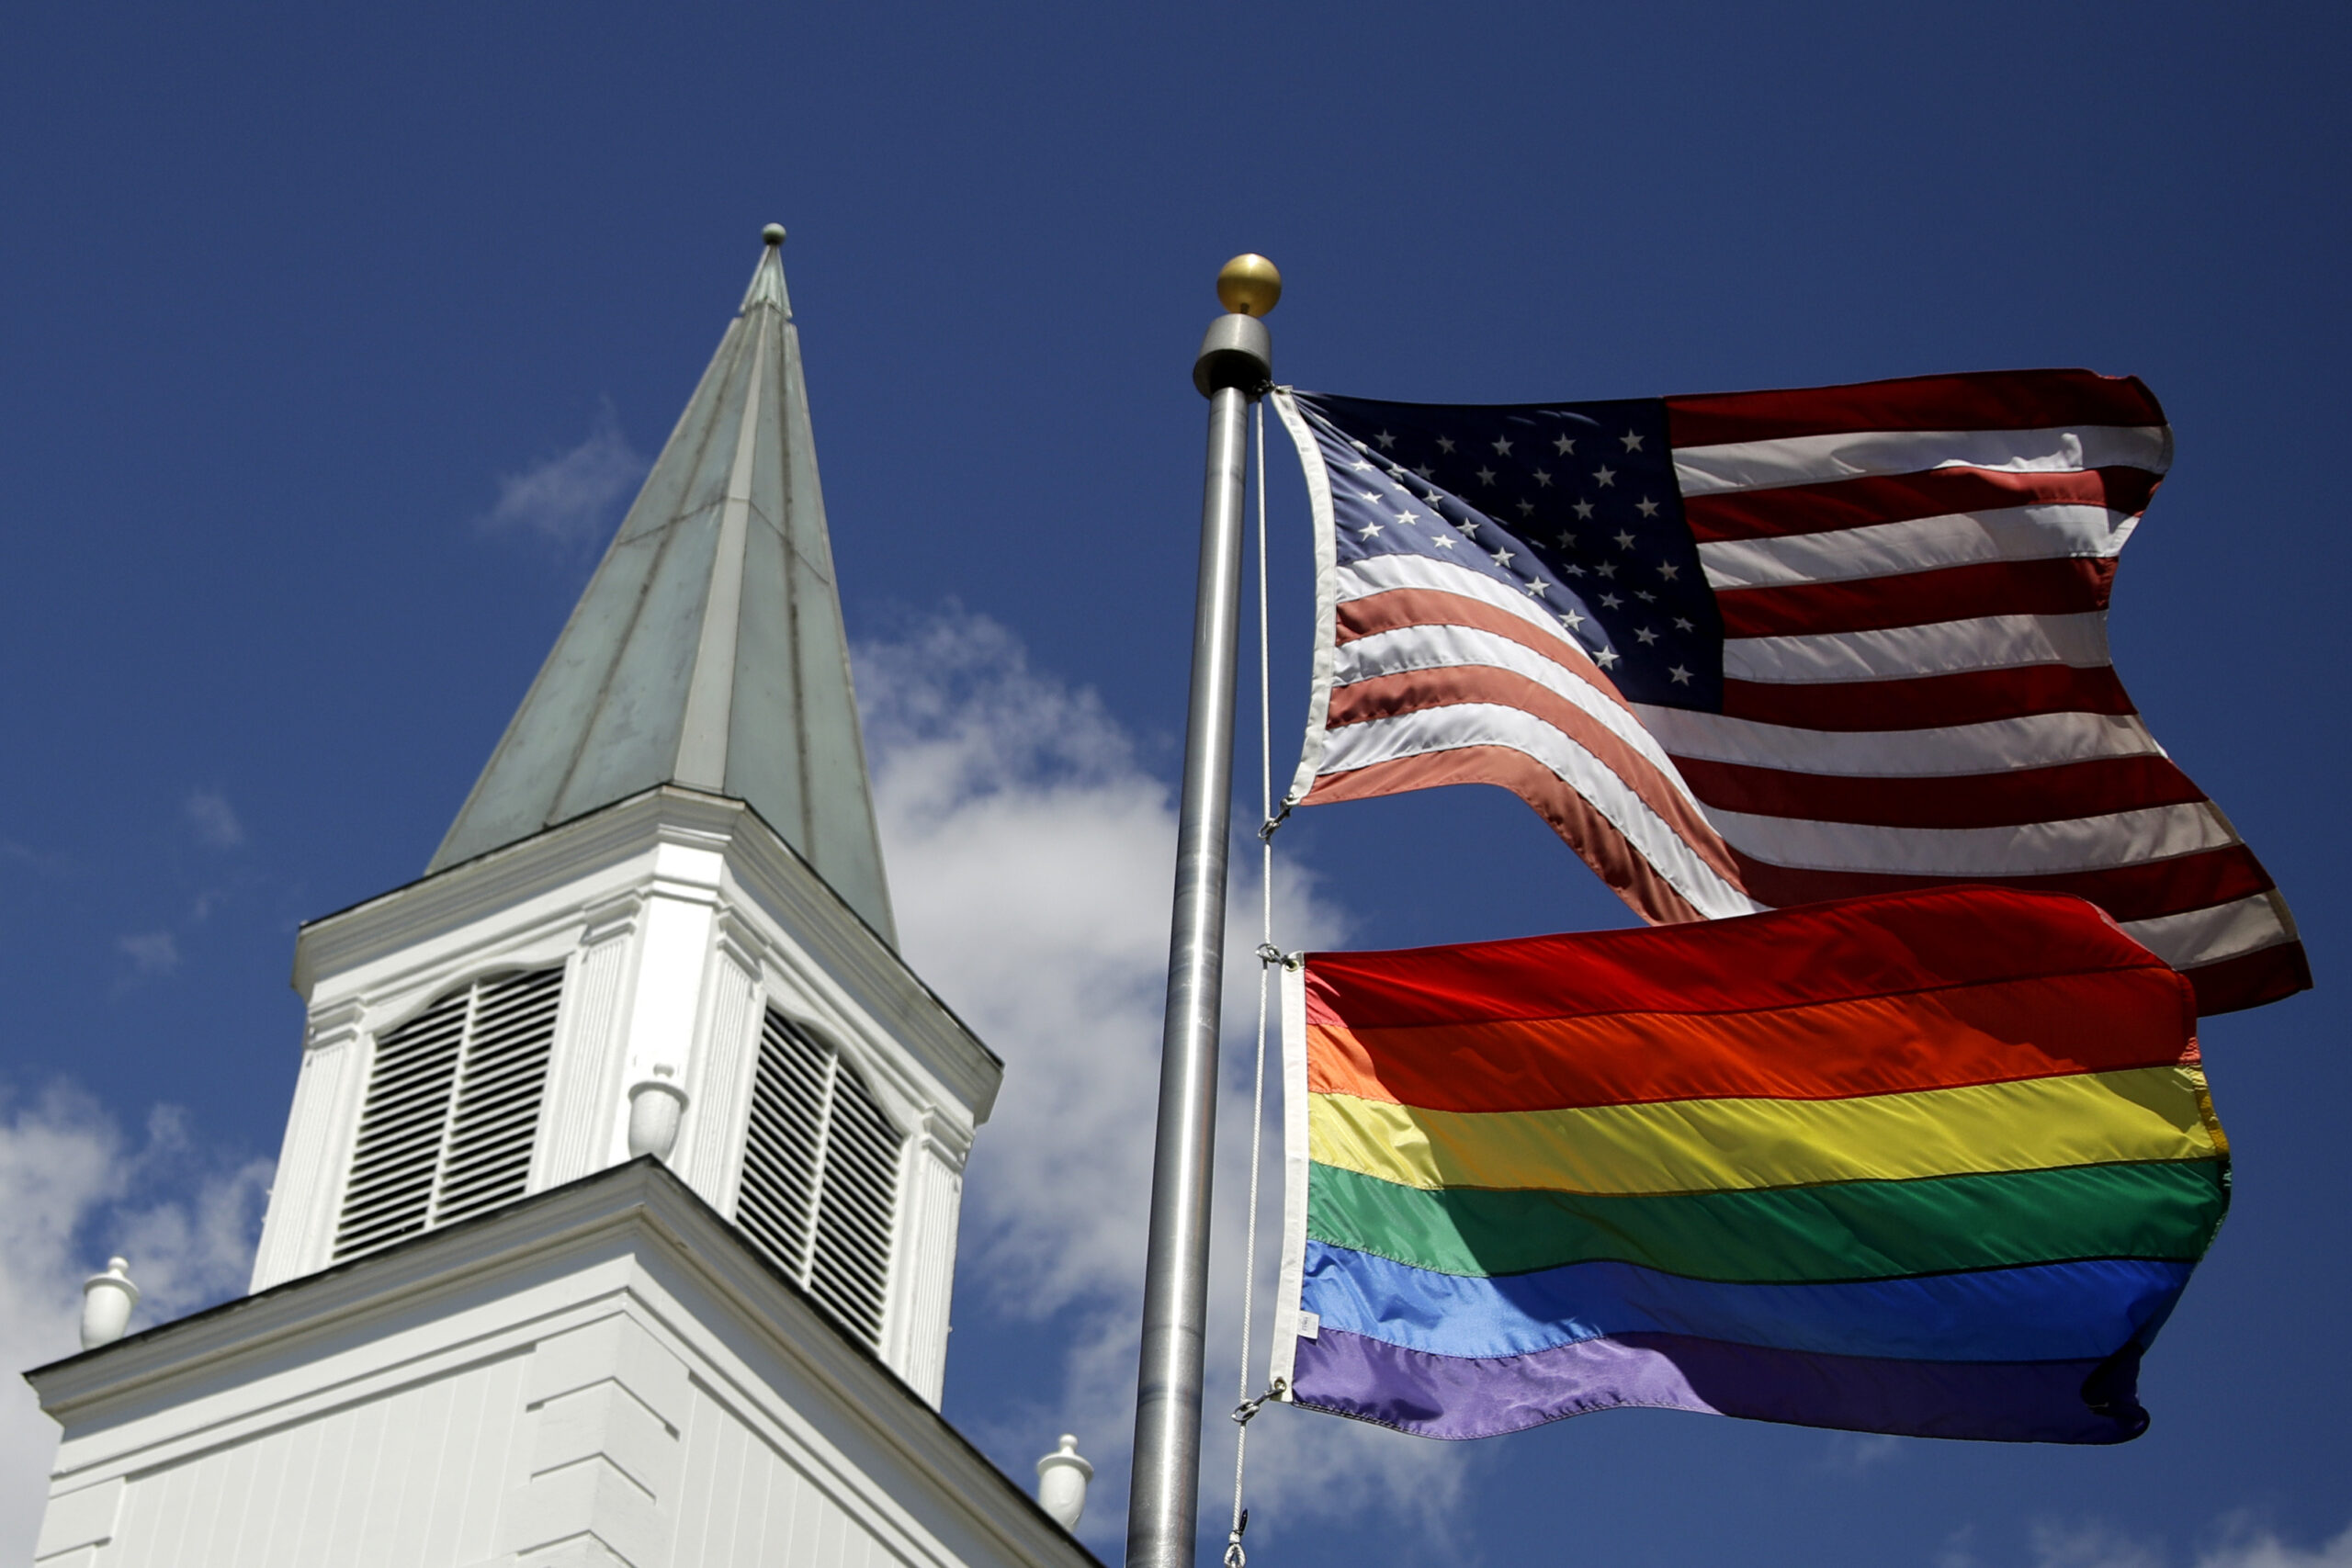 FILE - A gay pride rainbow flag flies along with the U.S. flag in front of the Asbury United Methodist Church in Prairie Village, Kan., on April 19, 2019. The United Methodist Church's Council of Bishops, ending a five-day meeting on Friday, April 29, 2022, acknowledged the inevitable breakup of their denomination, which will gain momentum during the weekend with the launch of a global movement led by theologically conservative Methodists. (AP Photo/Charlie Riedel, File)